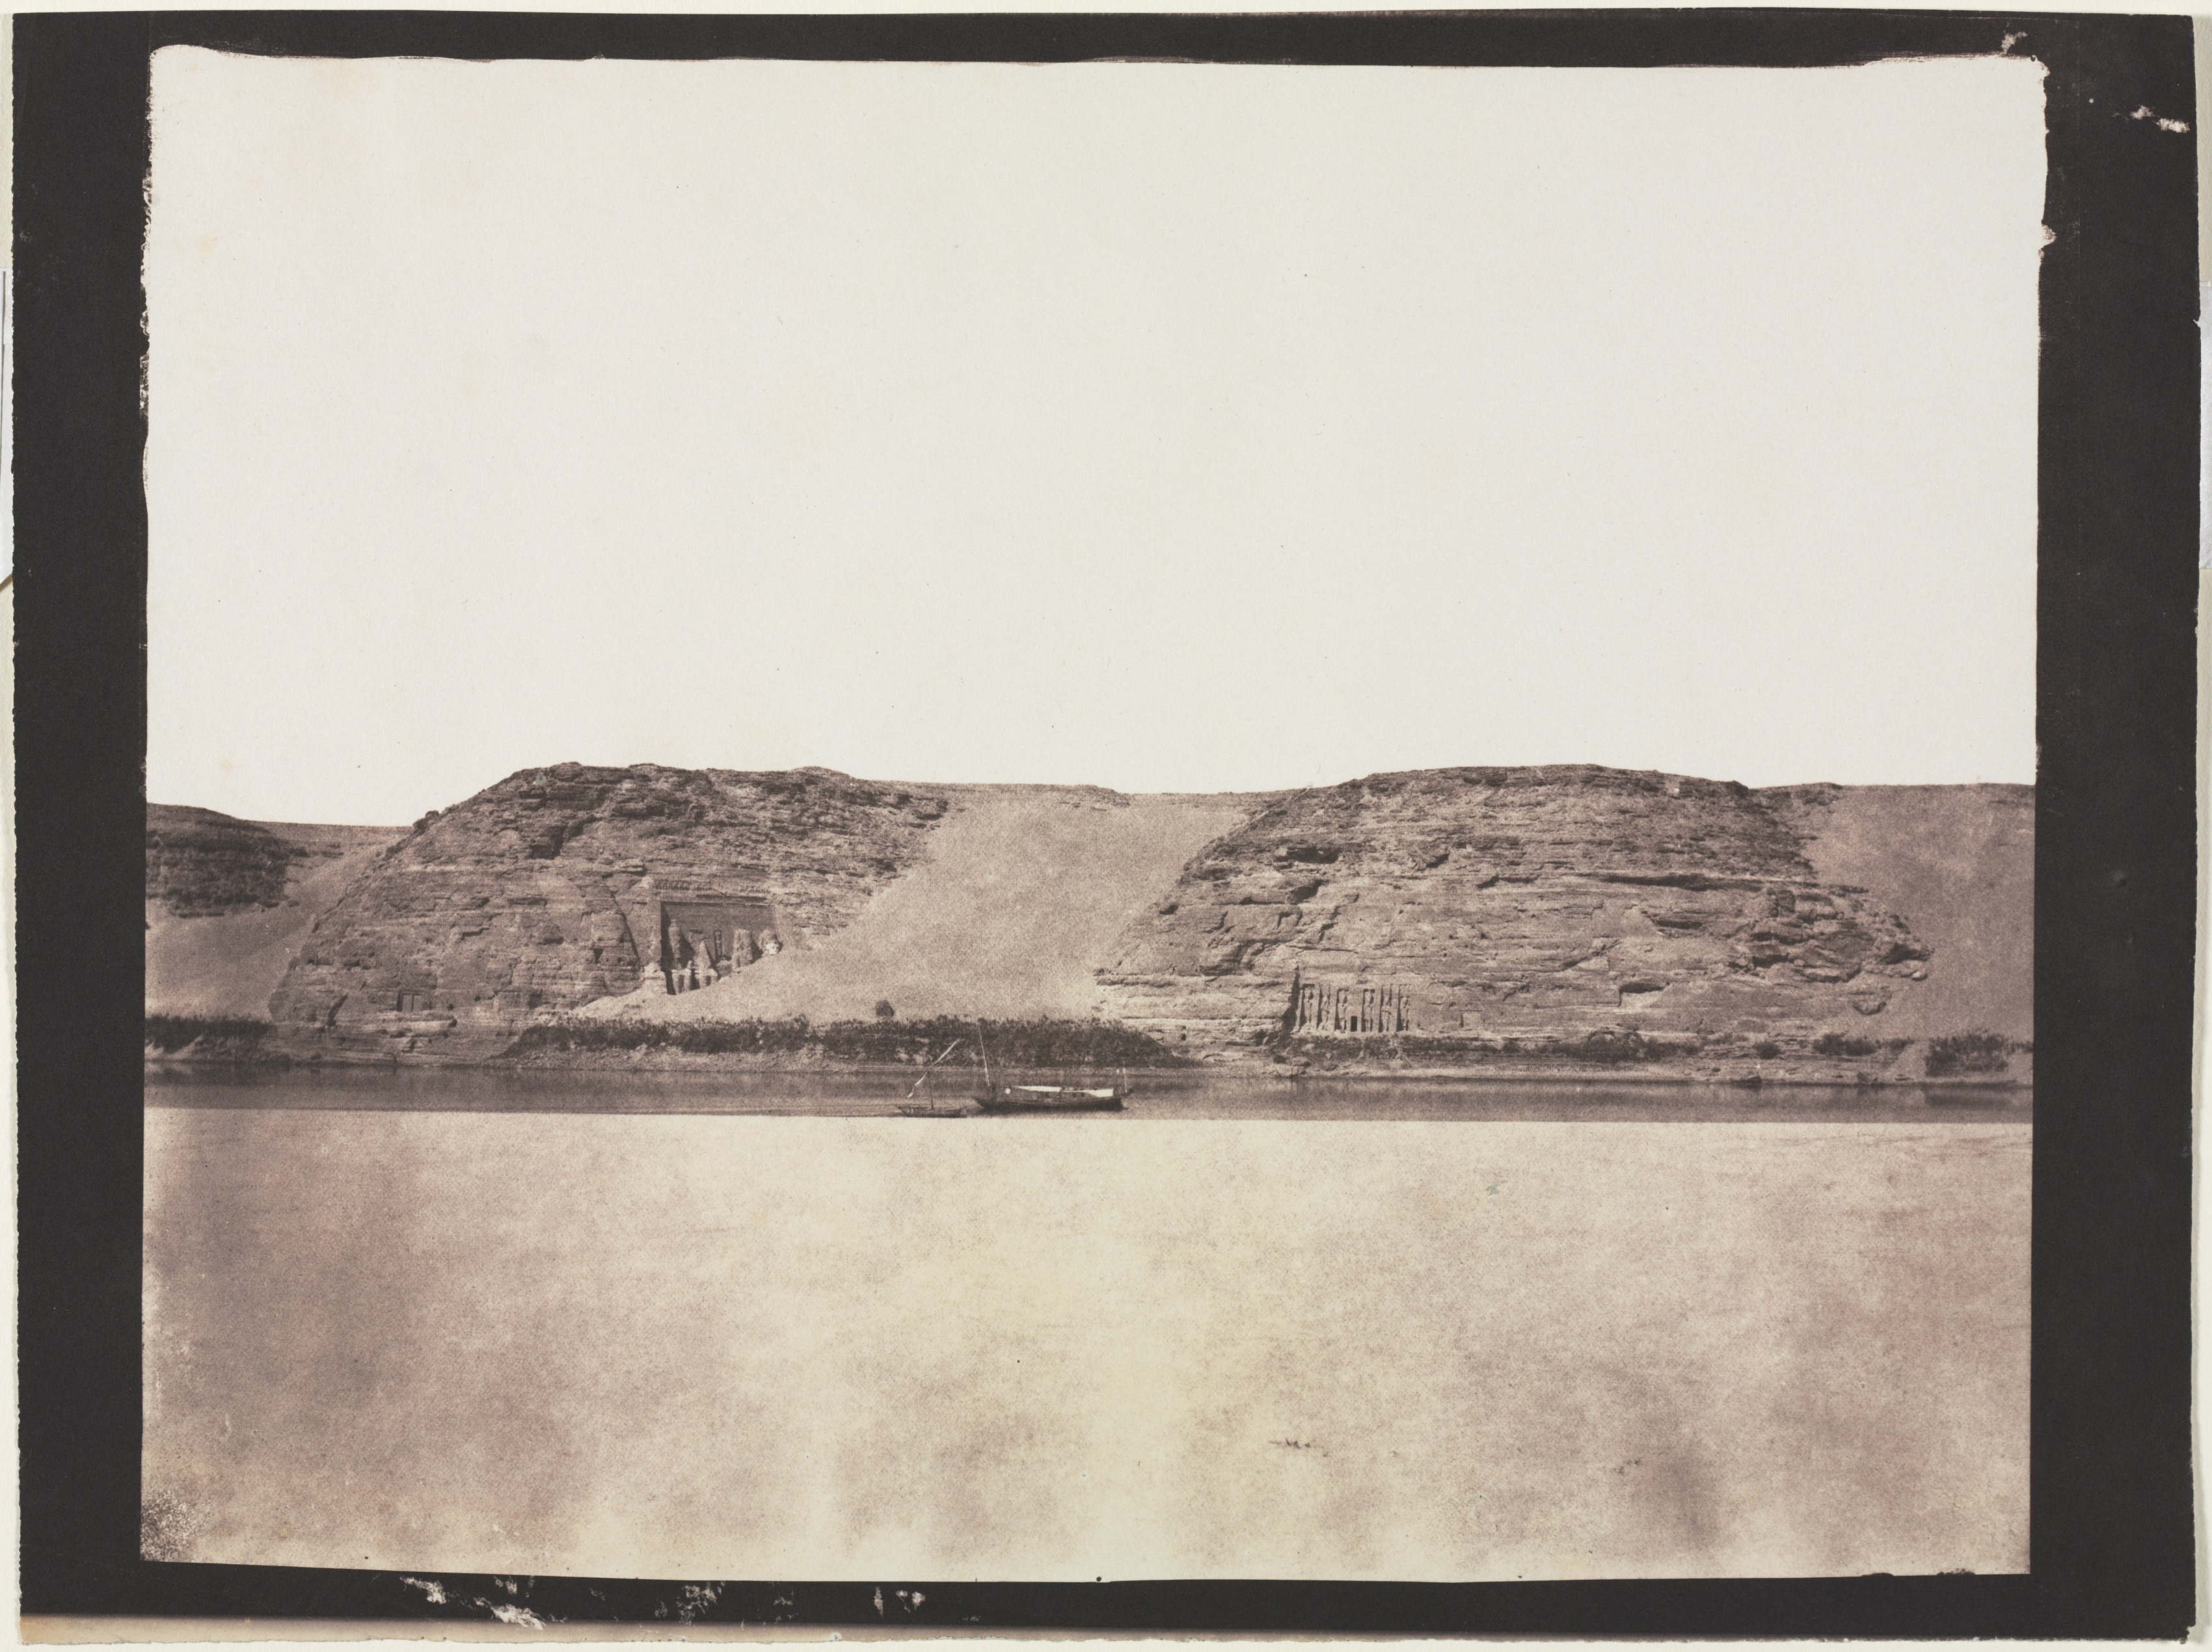 General View of Monuments Carved into Bedrock with Photographer's Dahabieh. Abu Simbel